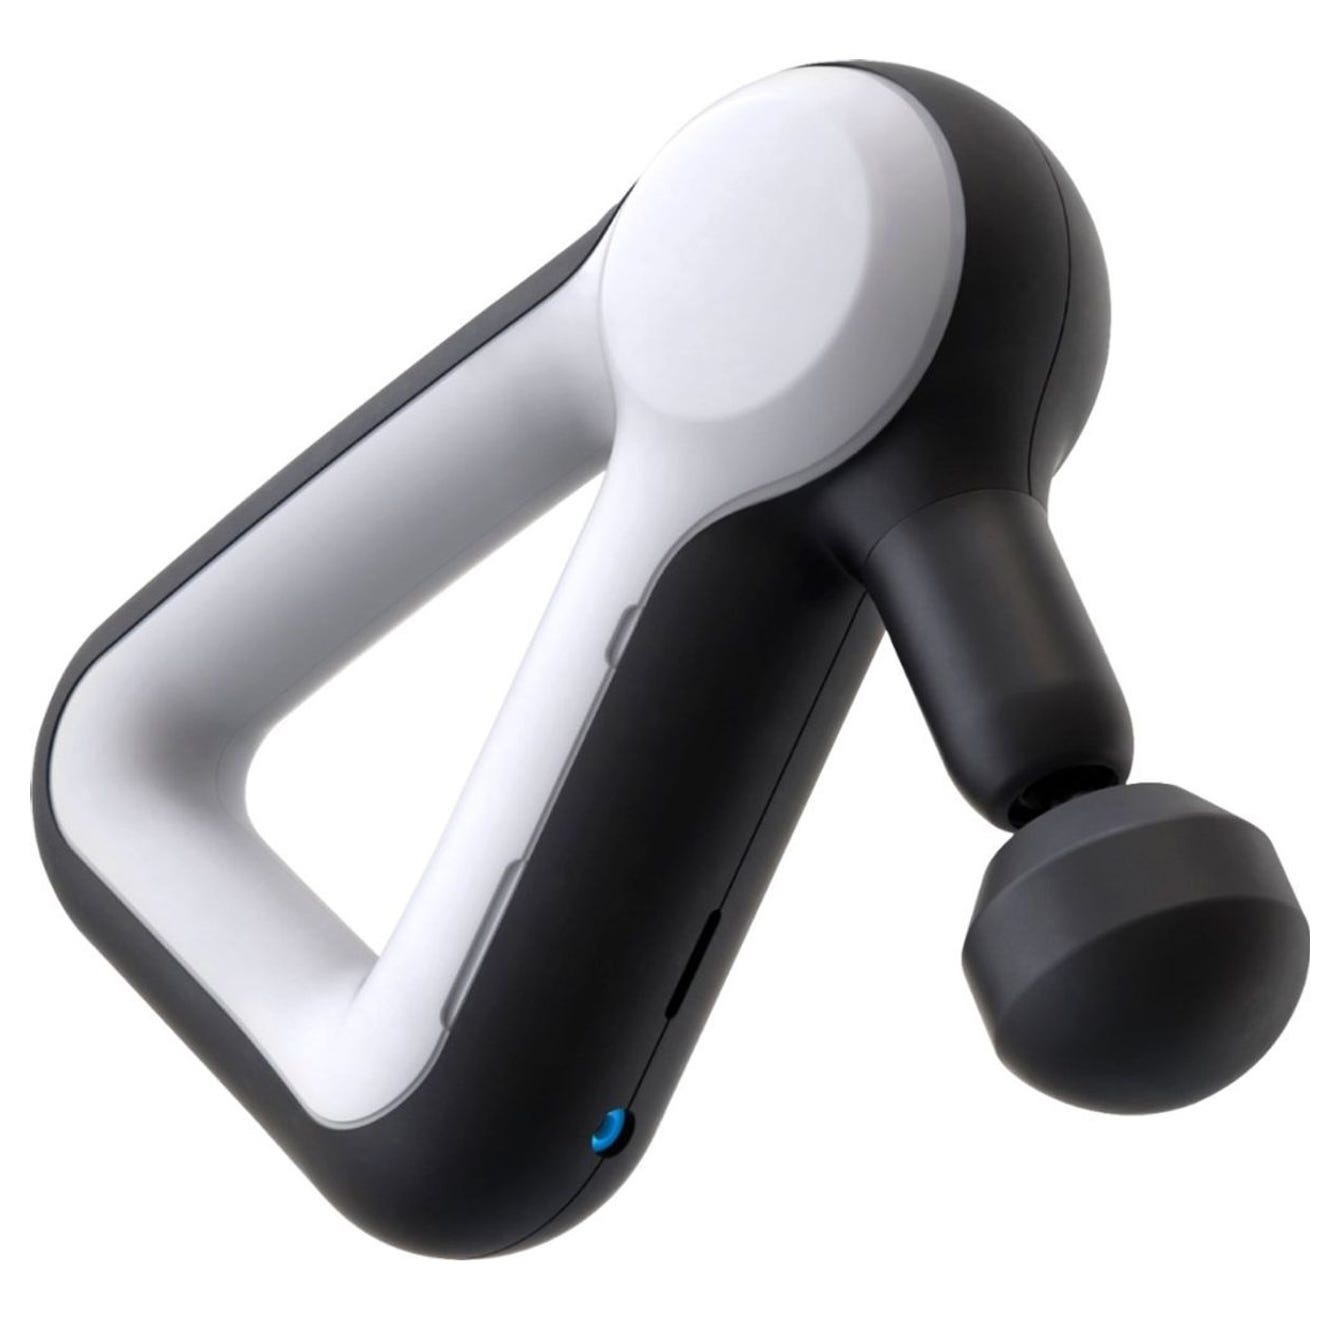 Handheld percussive massage device with a black and white design.